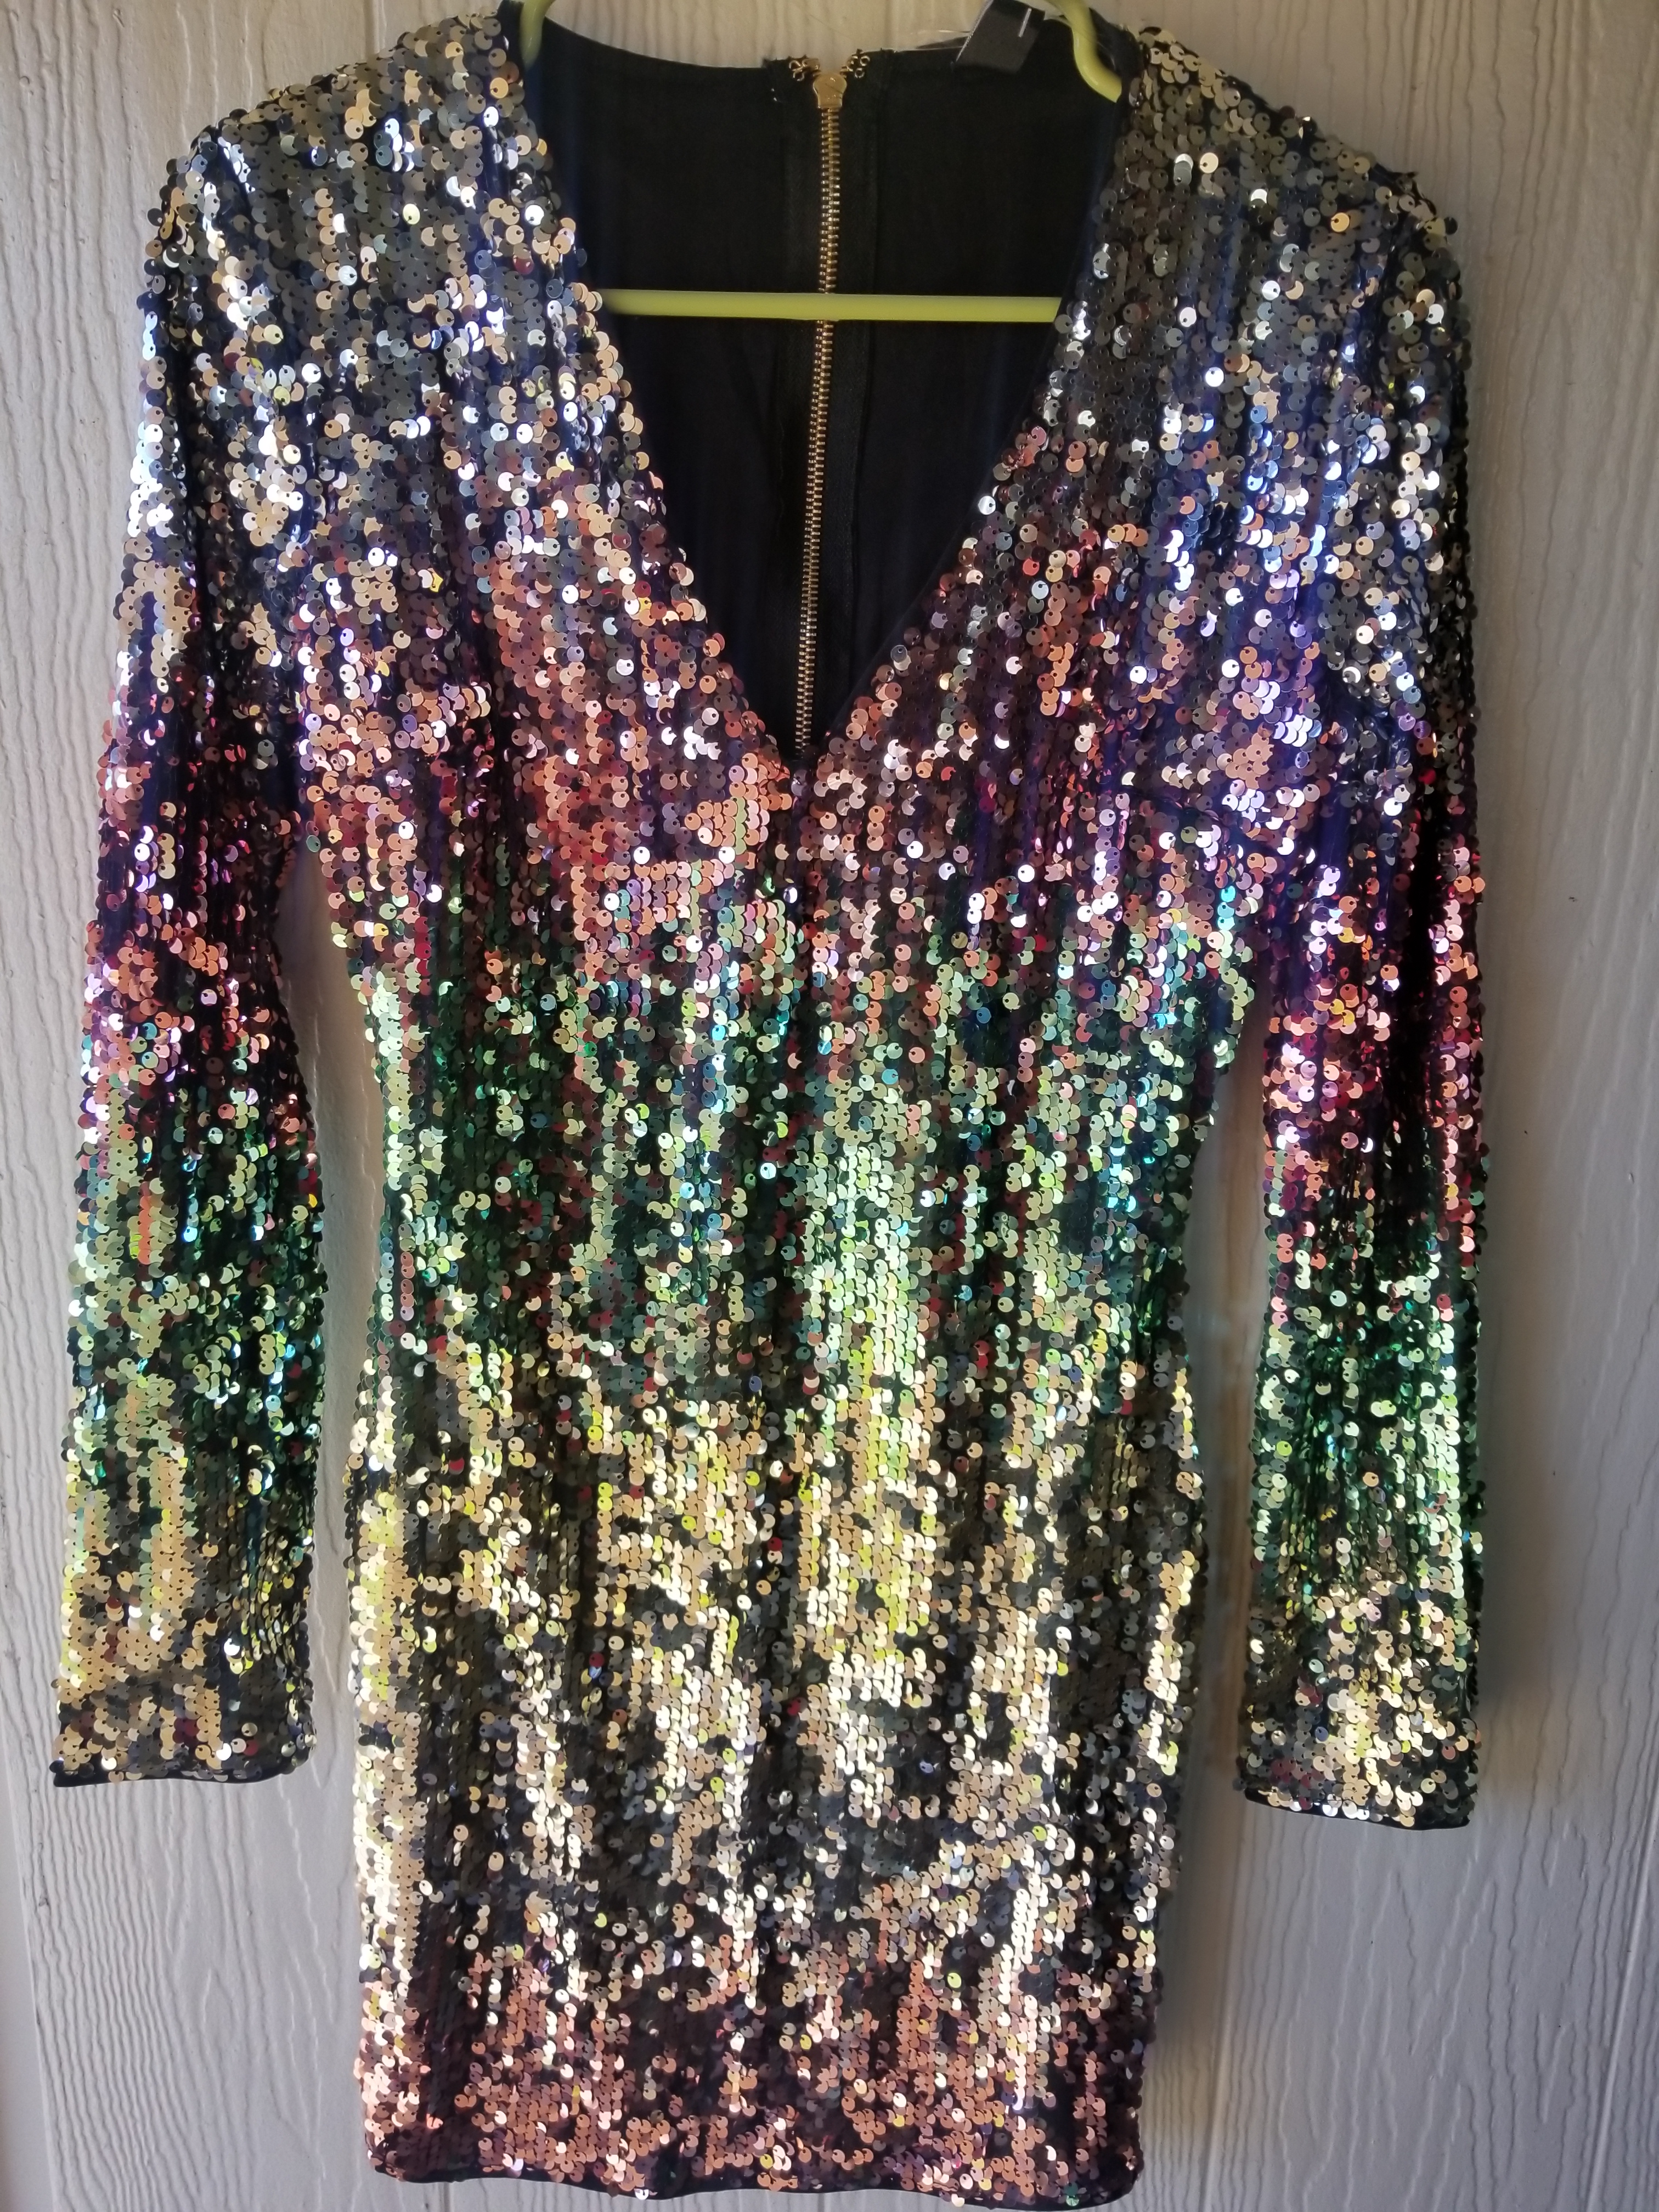 A fashion dress made of sequins